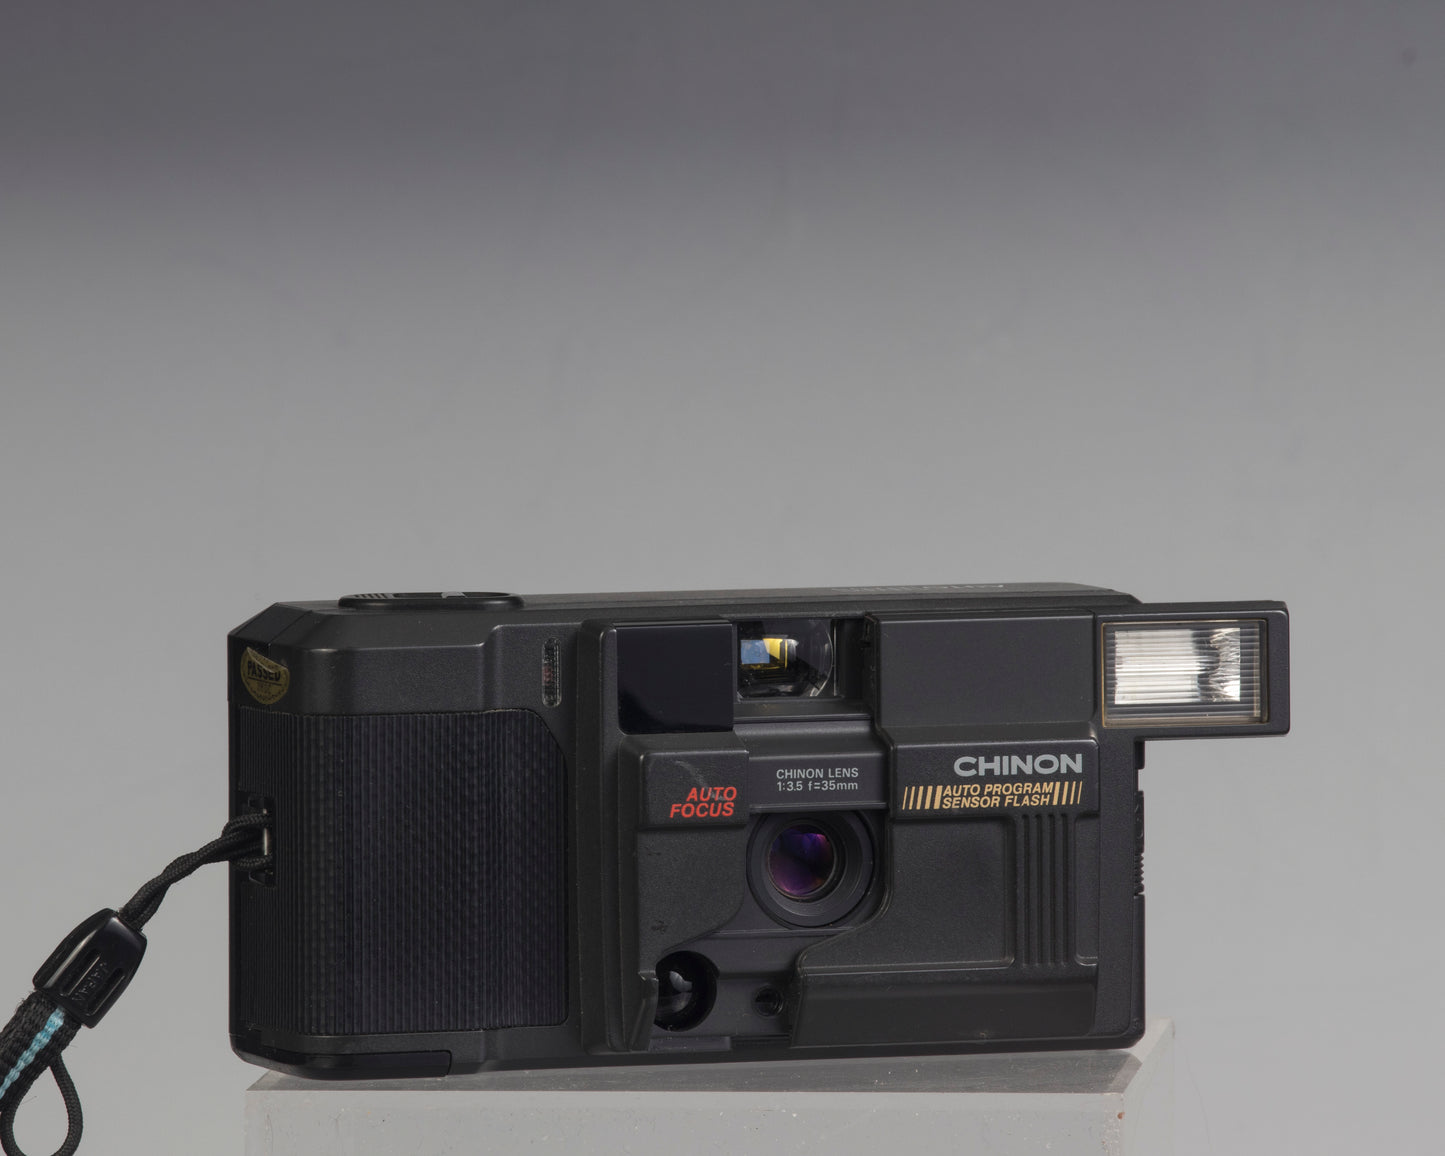 Chinon Autro 1001: a 35mm film point-and-shoot camera from the late 1980s